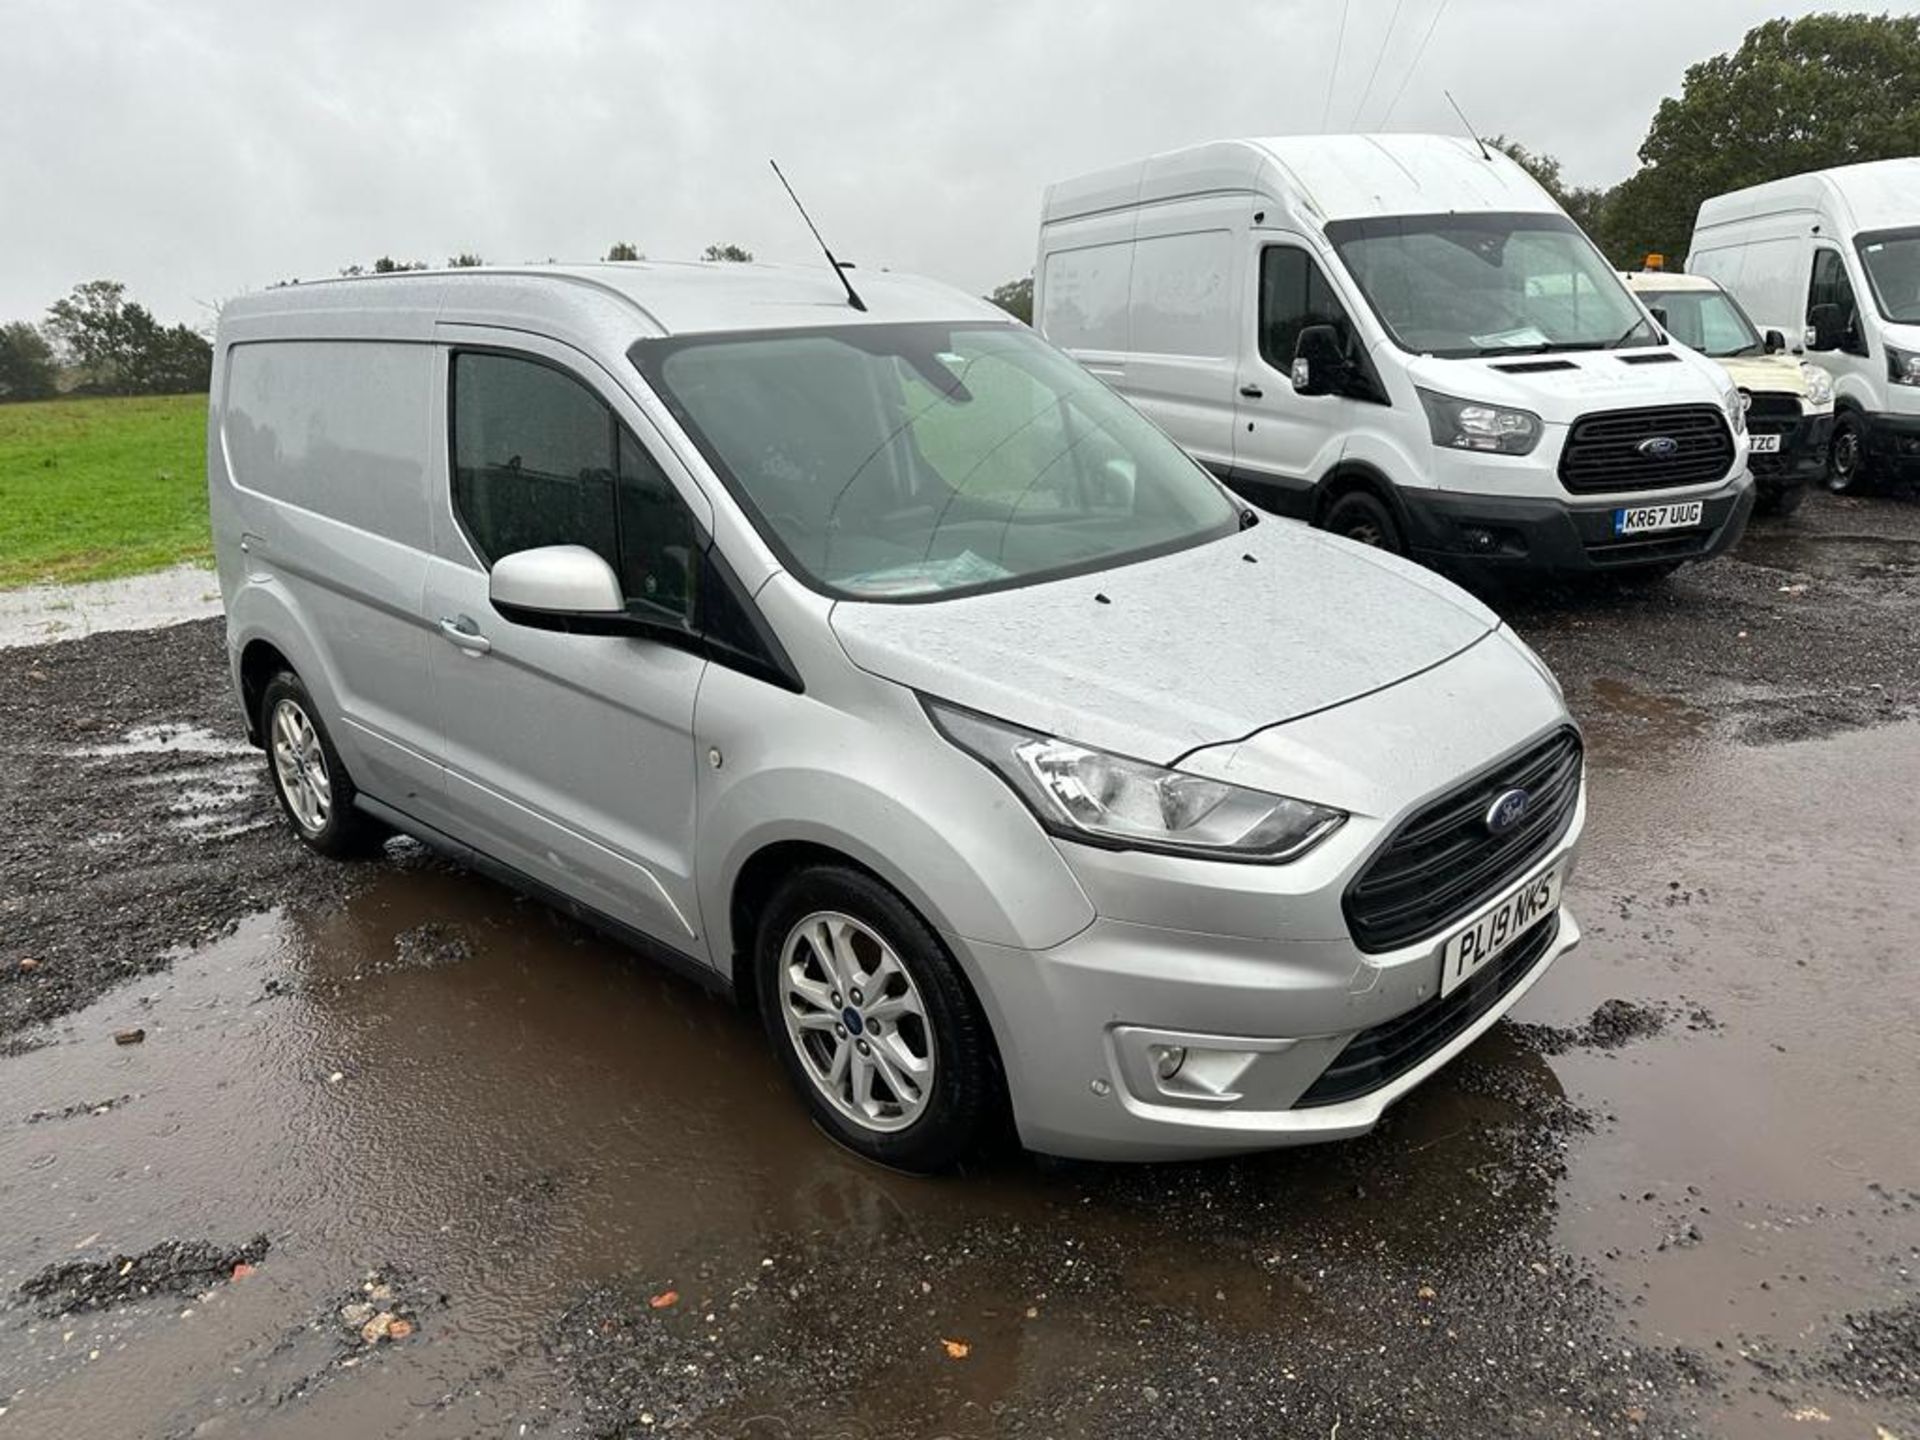 2019 19 FORD TRANSIT CONNECT LIMITED AUTOMATIC PANEL VAN - 123K MILES - ALLOY WHEELS - AIR CON 